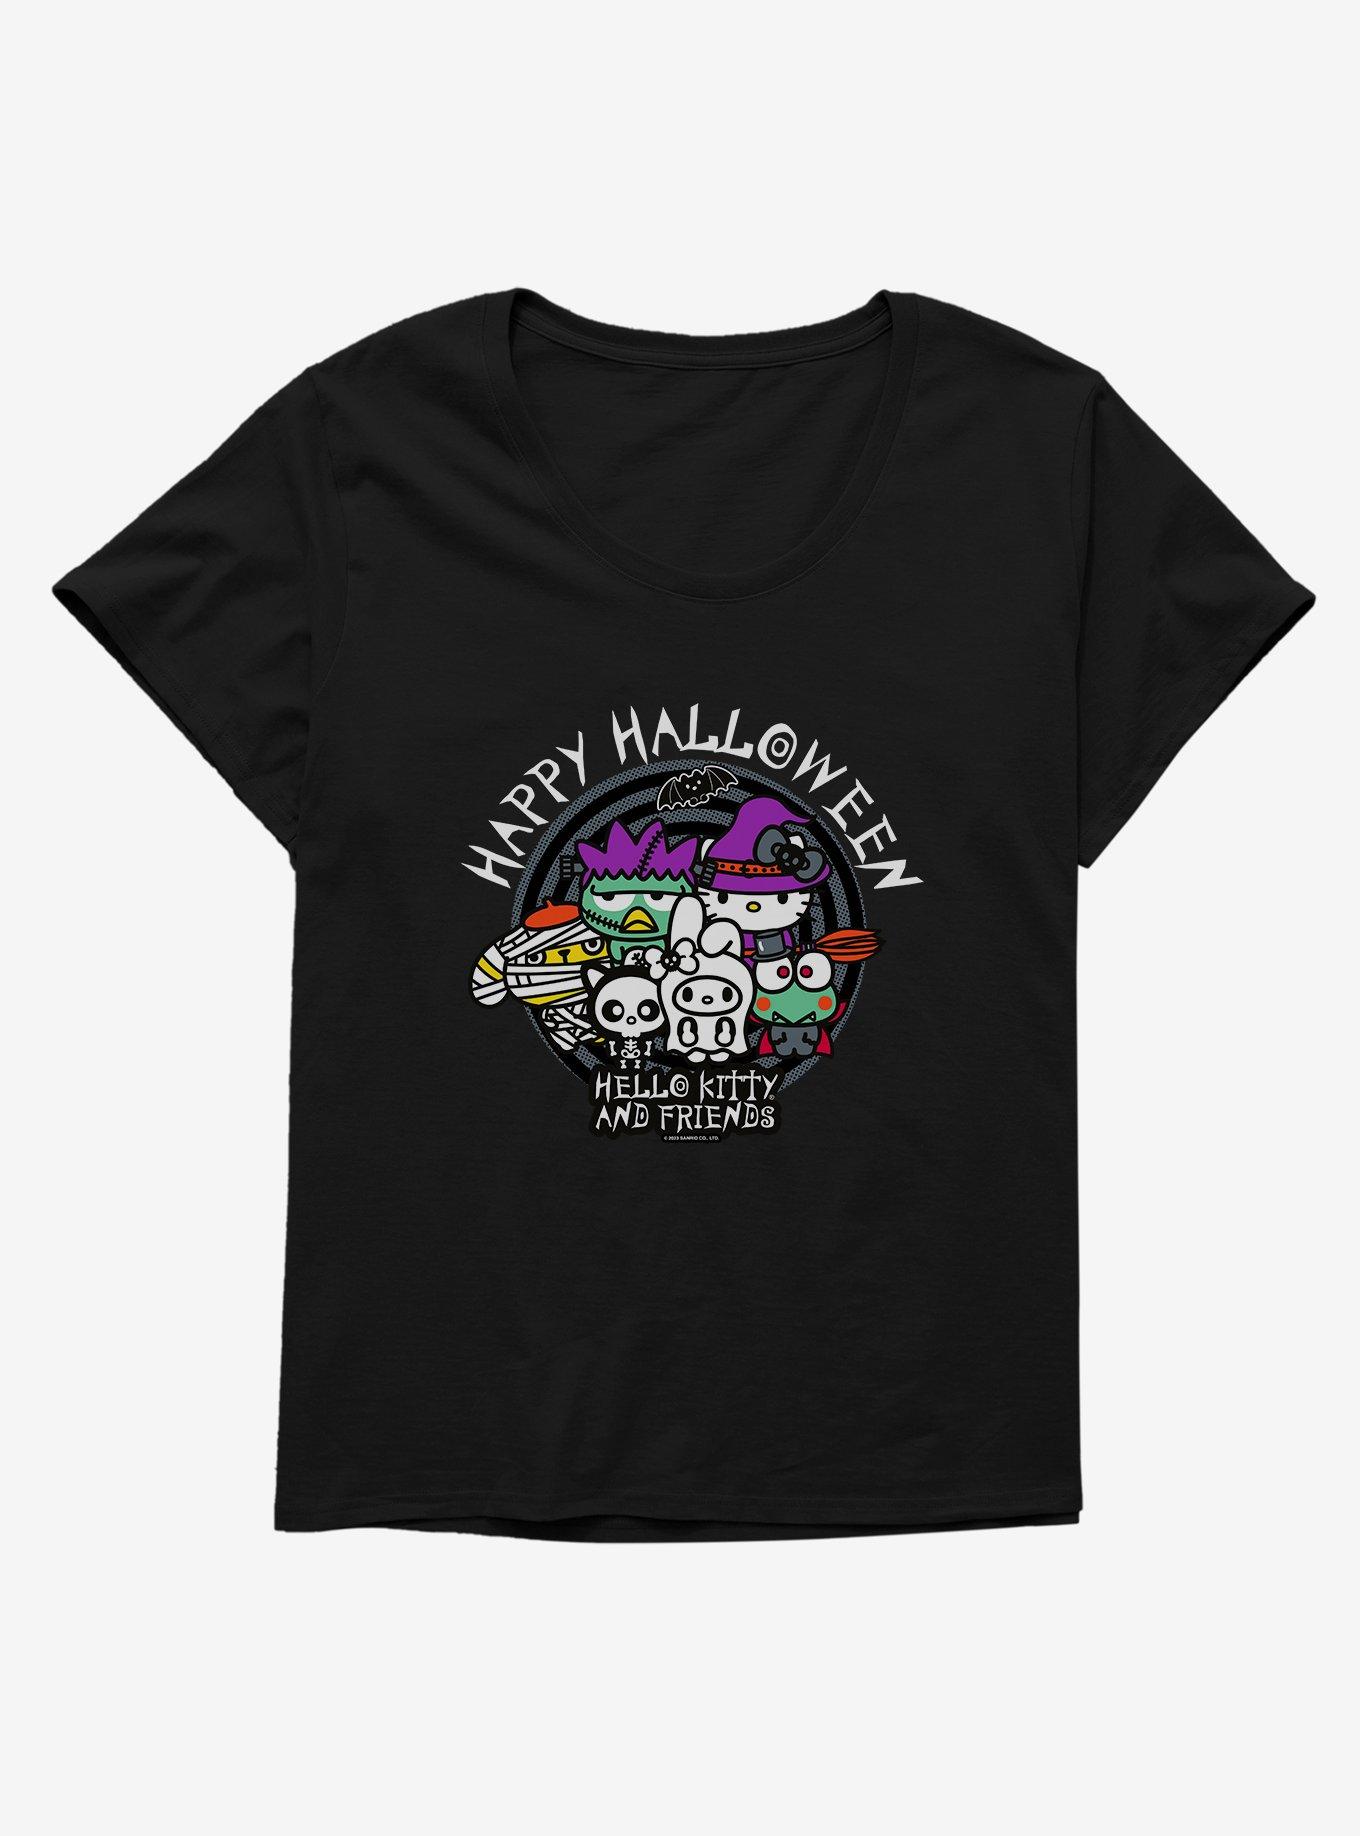 Hello Kitty And Friends Group Halloween Costume Womens T-Shirt Plus Size, BLACK, hi-res